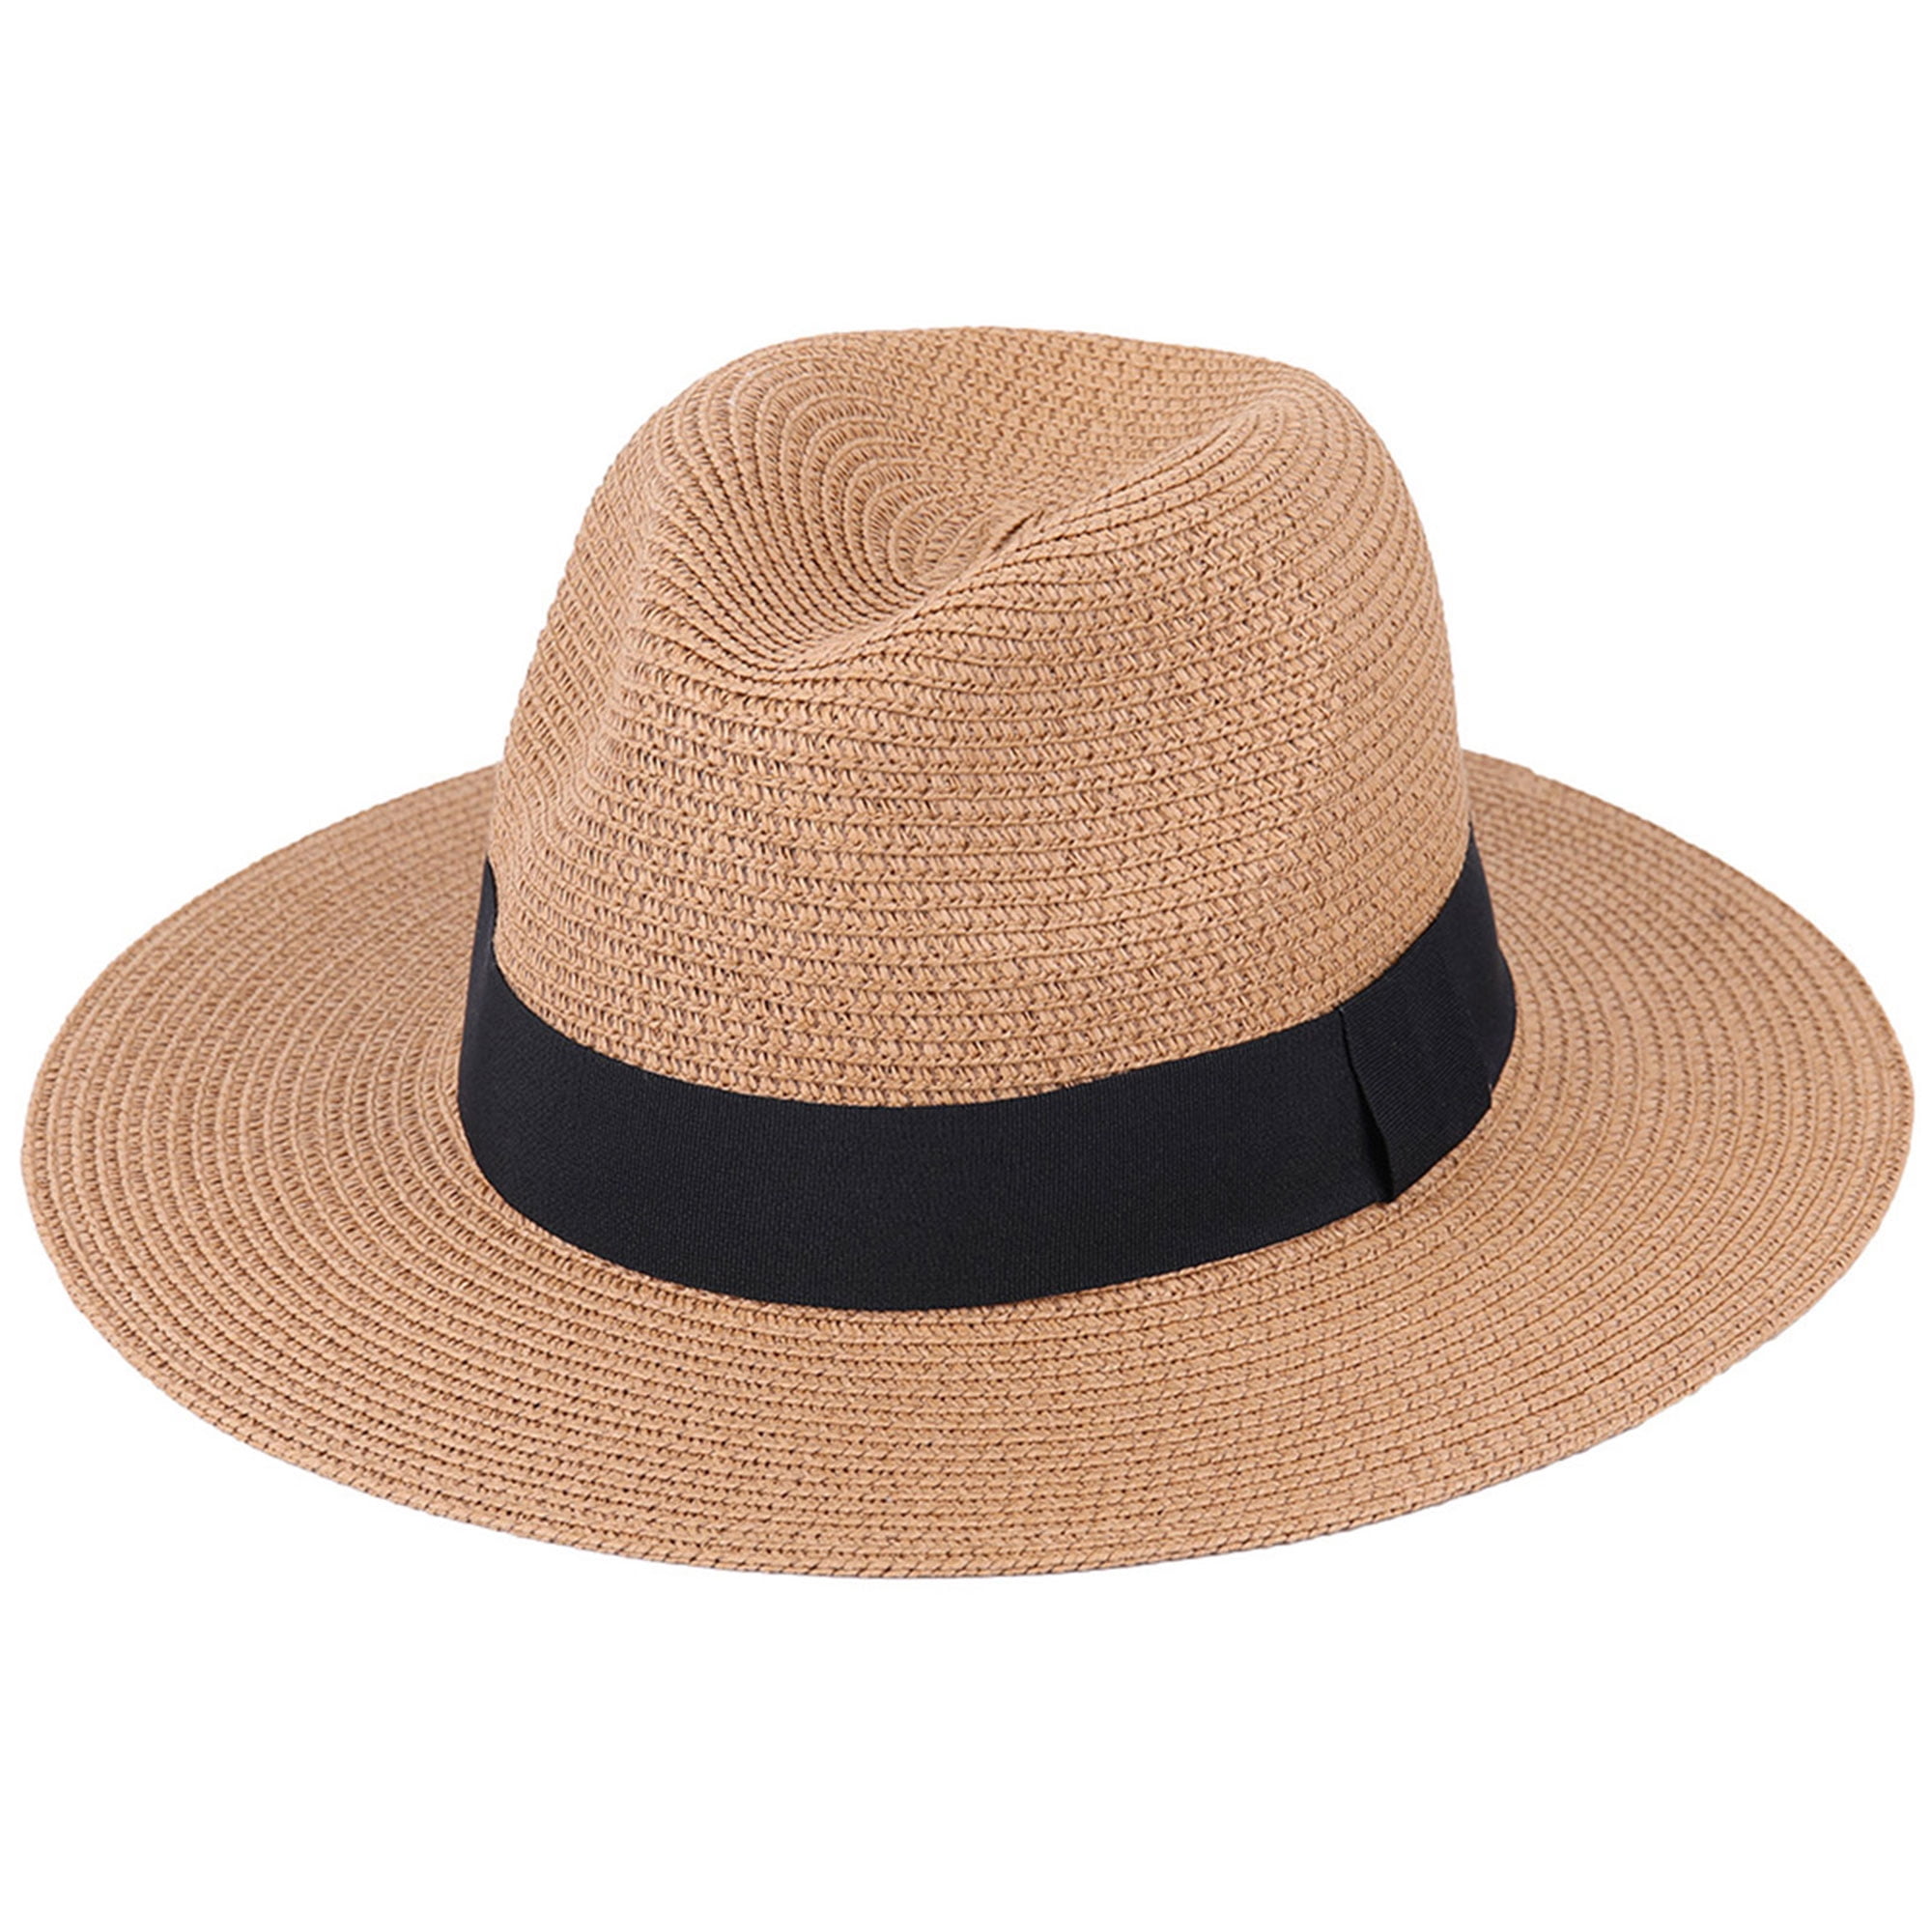 Mens Foldable Straw in Panama Shape-Style with Black Band Summer Sun Hat 